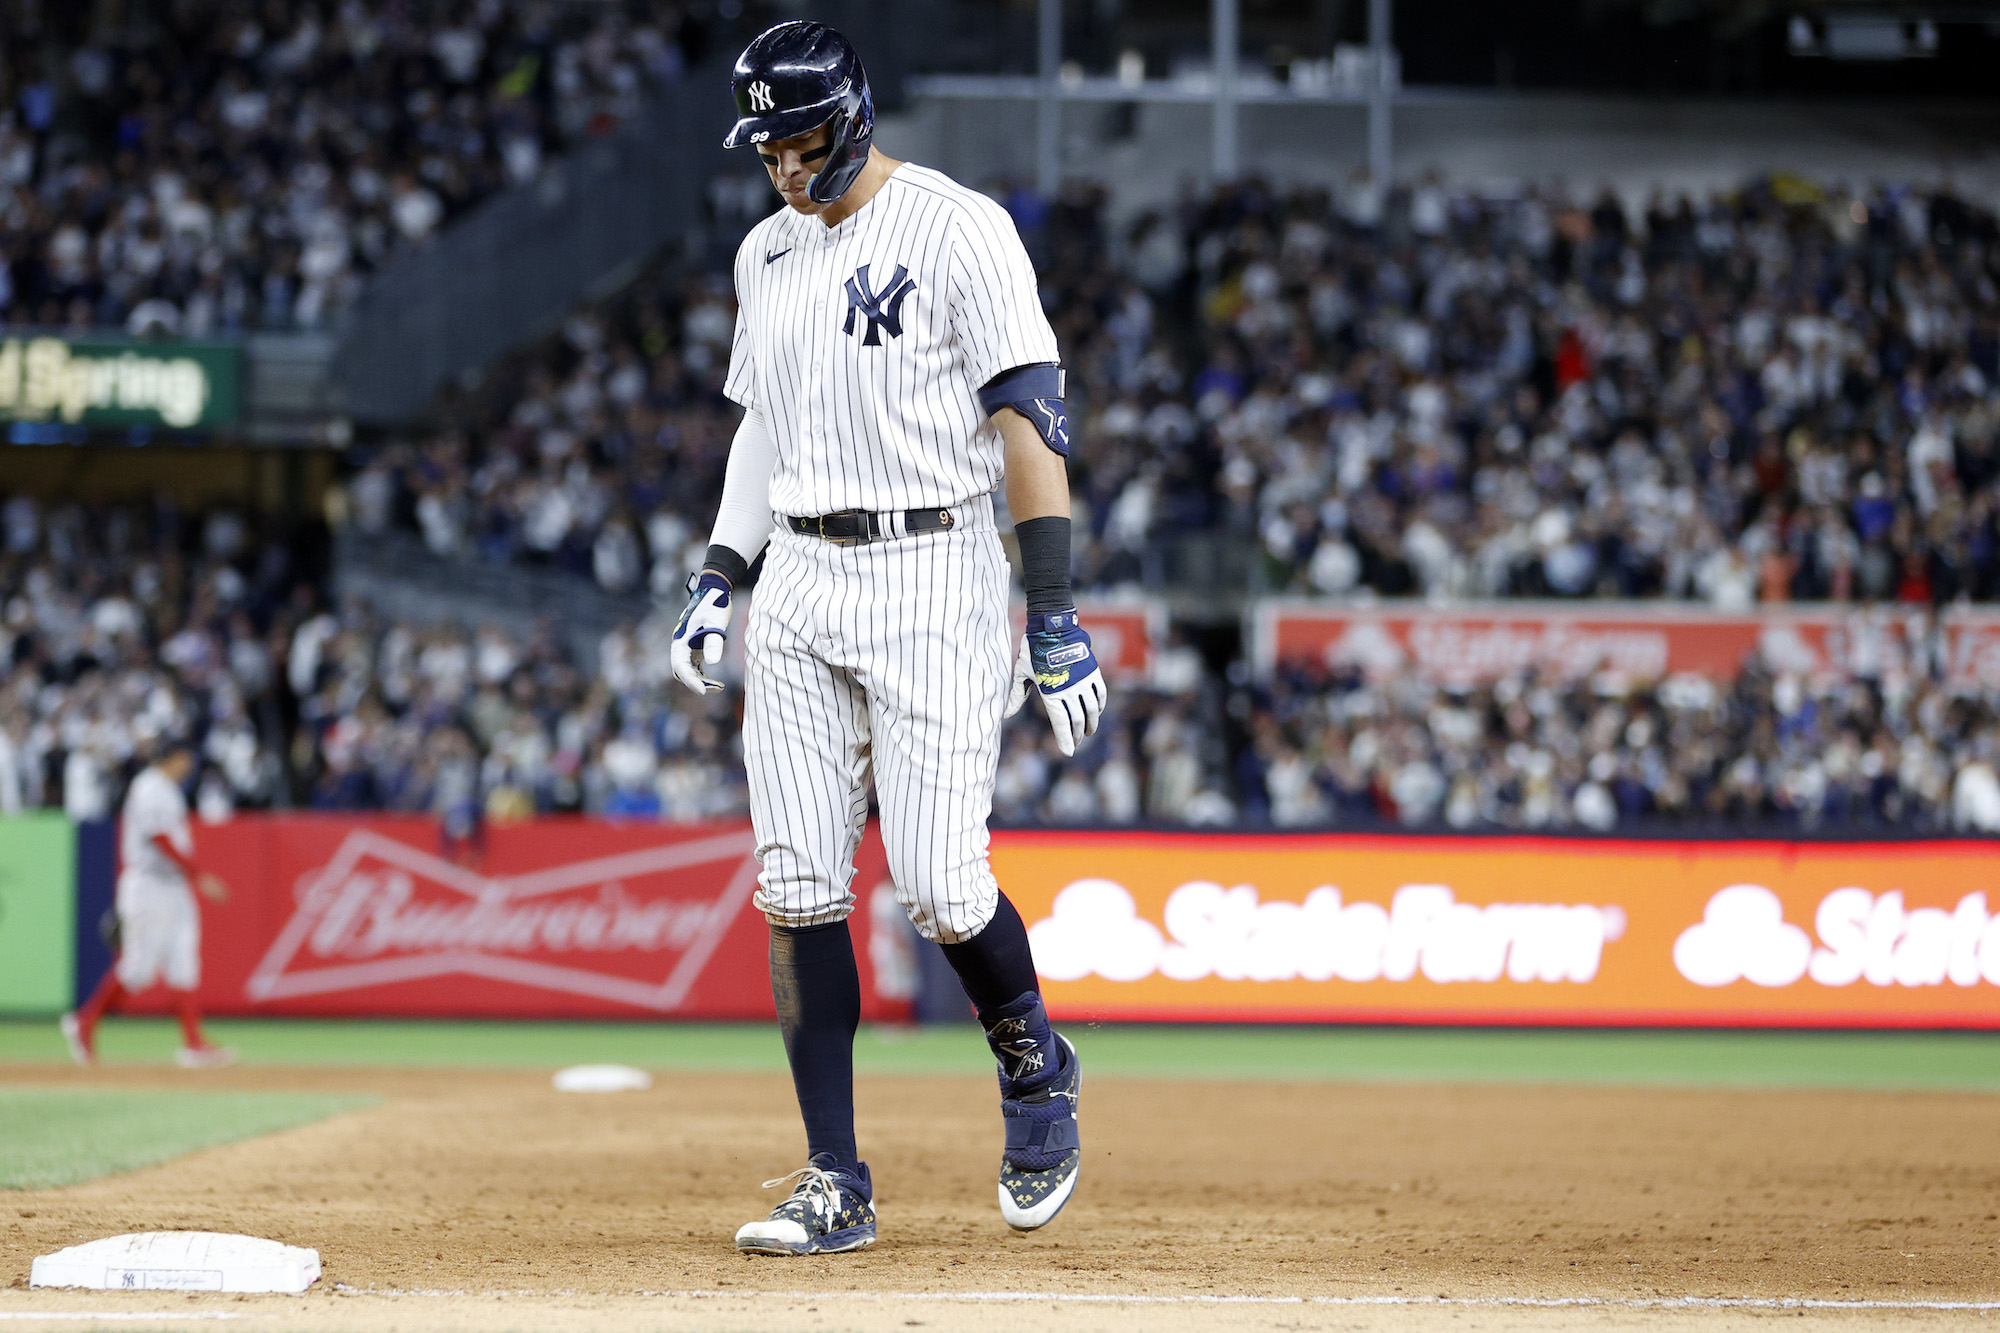 NEW YORK, NEW YORK - SEPTEMBER 22: Aaron Judge #99 of the New York Yankees reacts after flying out to center during the ninth inning against the Boston Red Sox at Yankee Stadium on September 22, 2022 in the Bronx borough of New York City. The Yankees won 5-4. (Photo by Sarah Stier/Getty Images)